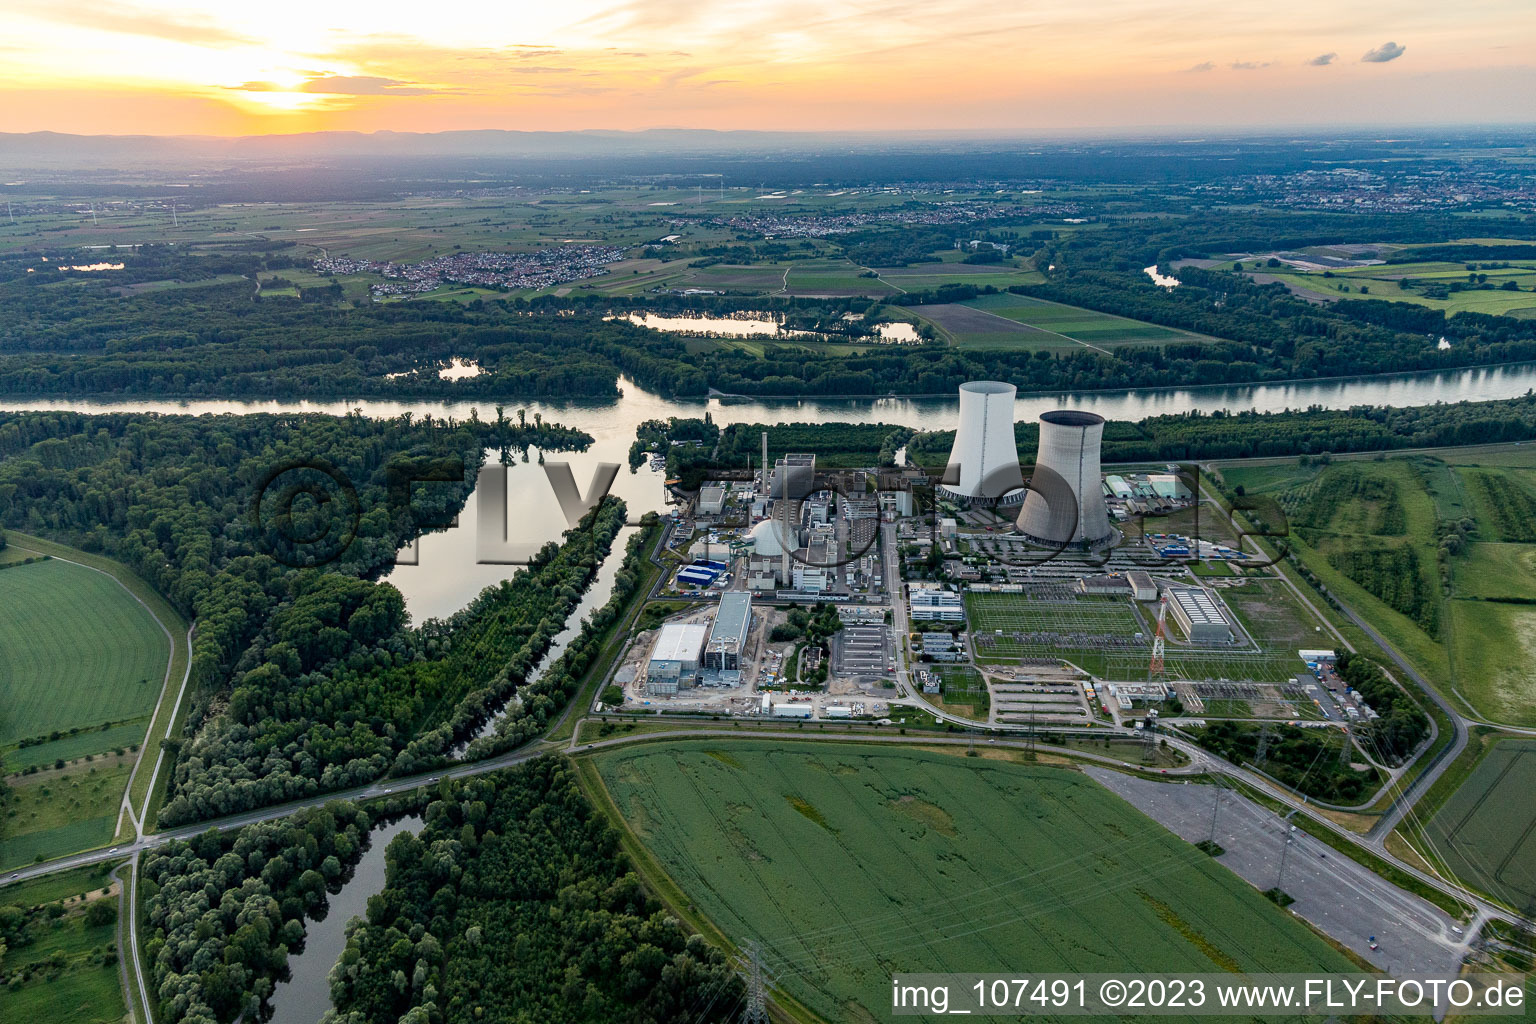 Building the partly decommissioned reactor units and systems of the NPP - NPP nuclear power plant EnBW Kernkraft GmbH, Kernkraftwerk Philippsburg in Philippsburg in the state Baden-Wurttemberg, Germany